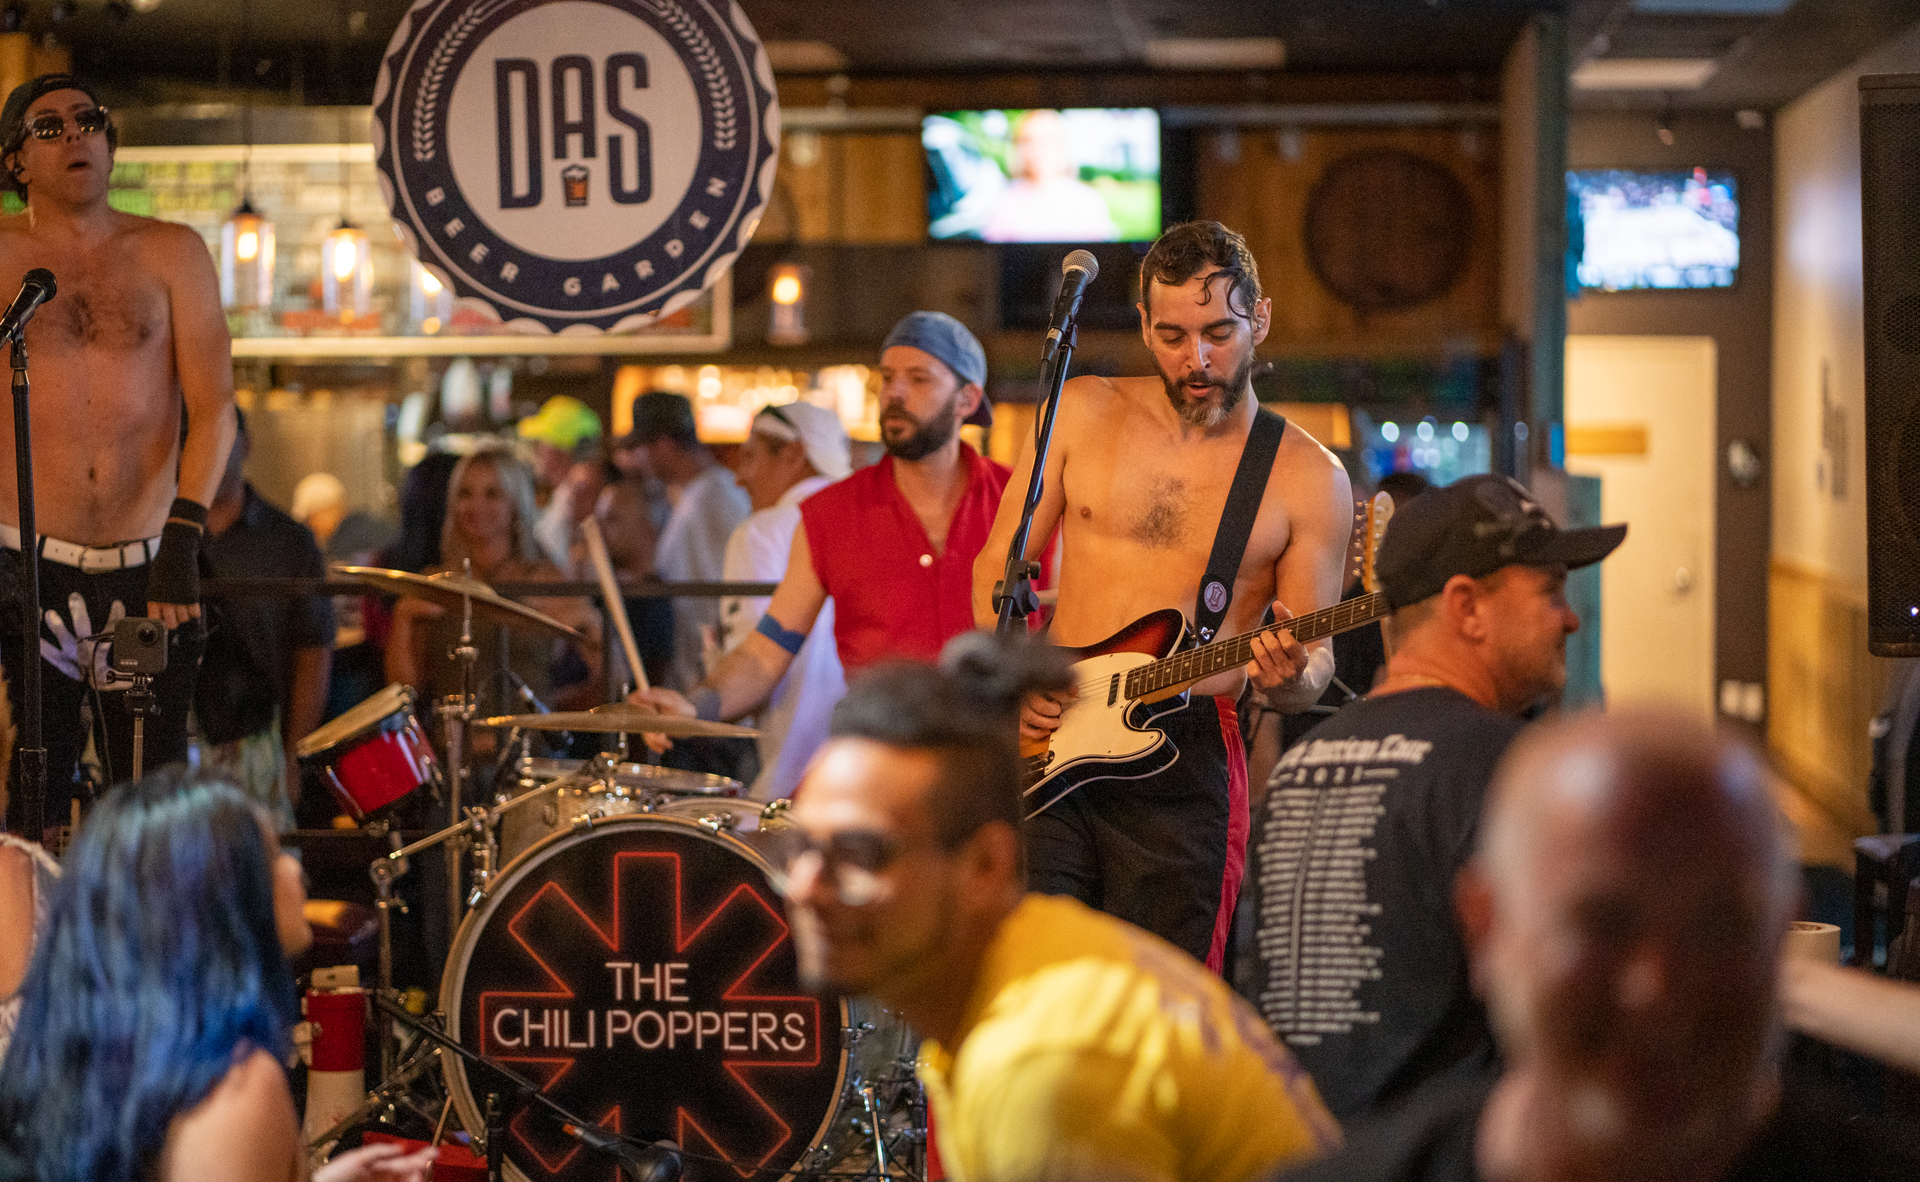 Chili Poppers performing live at DAS Beer Garden in Jupiter, Florida. 